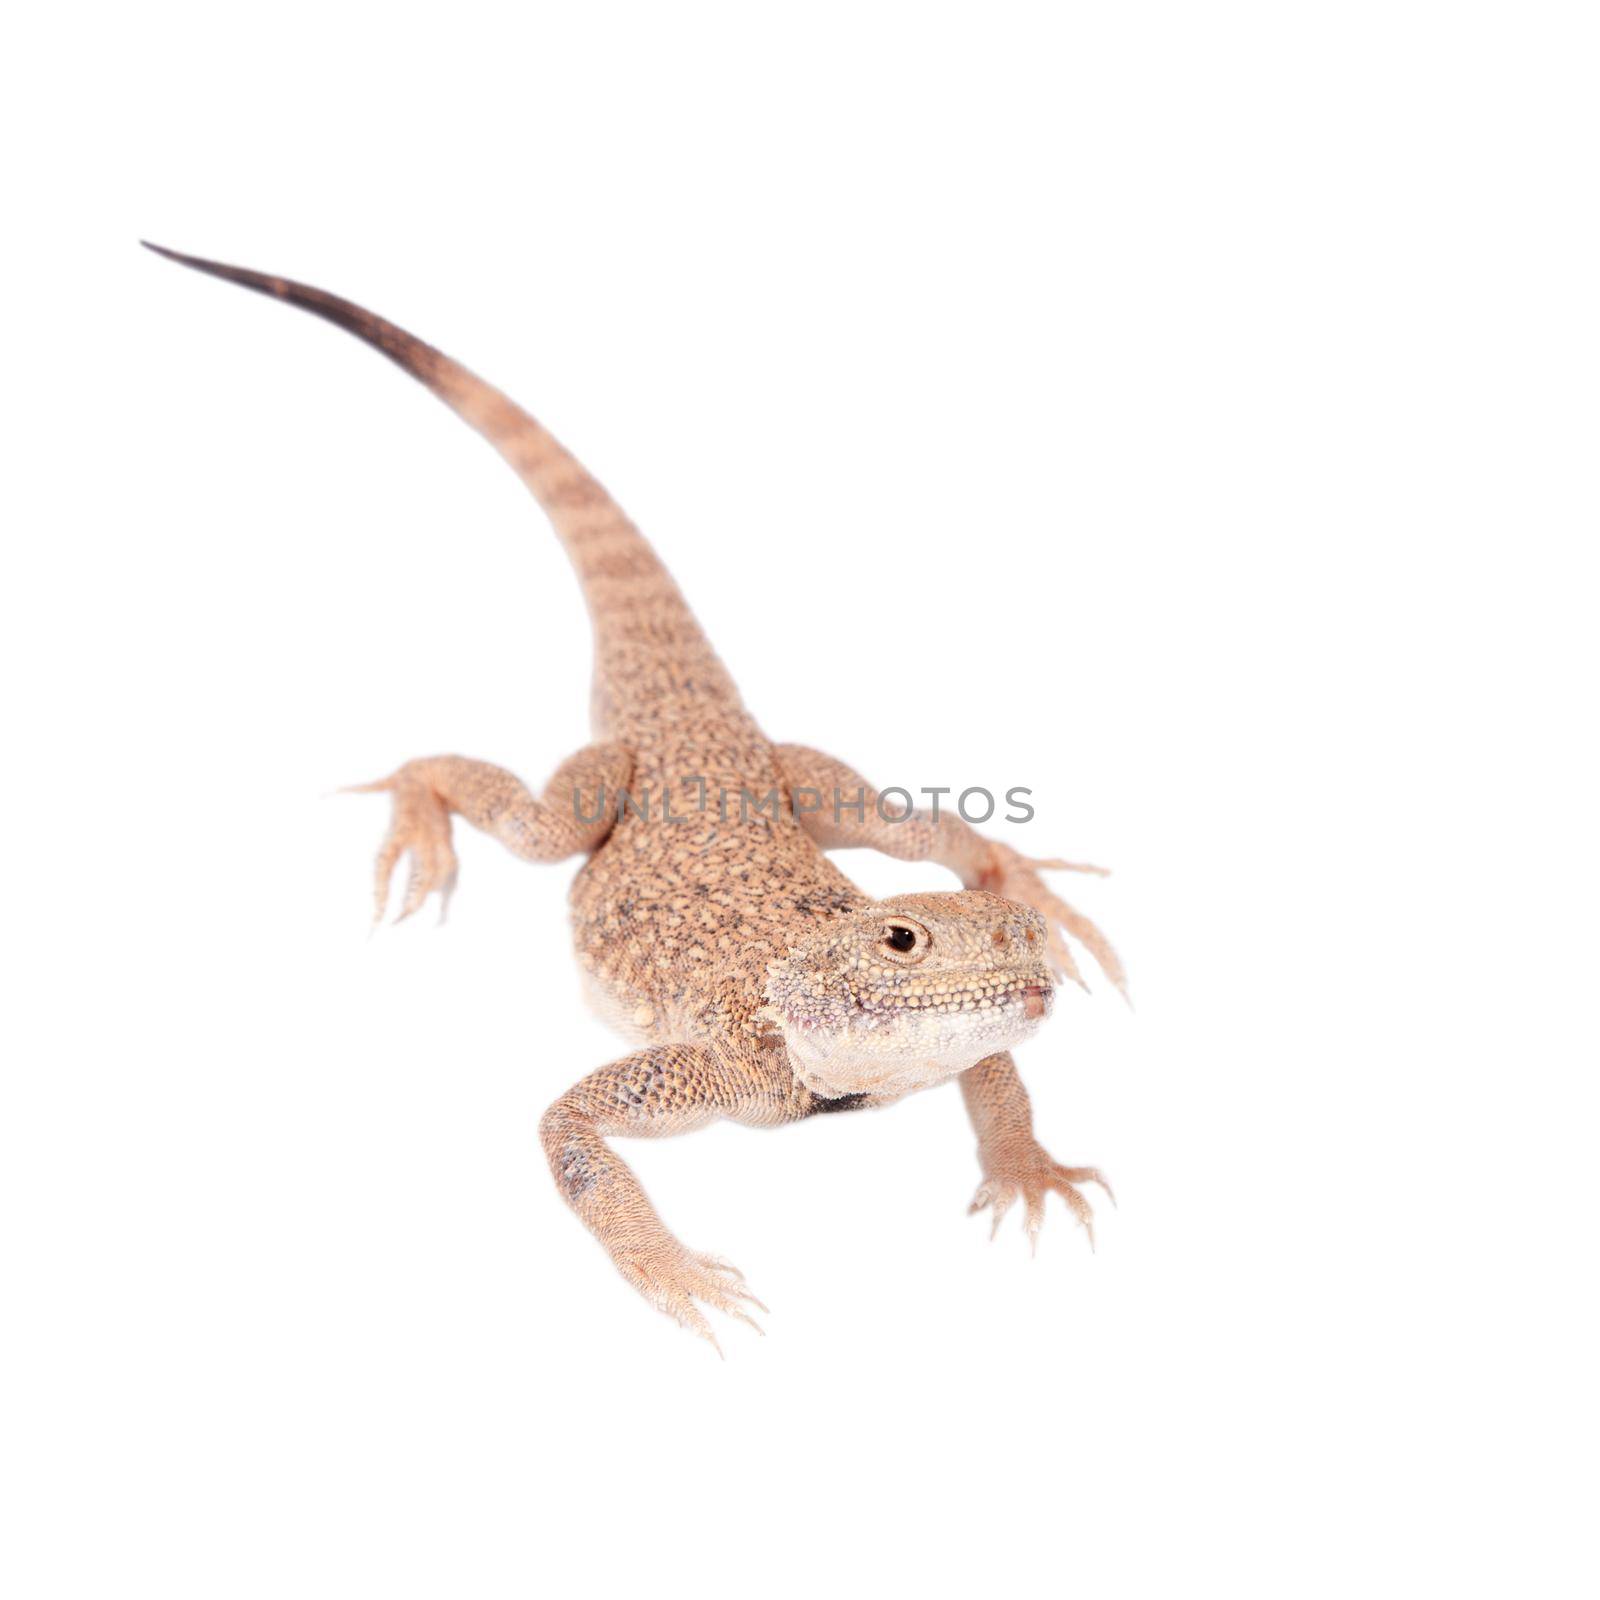 Secret Toad-Headed Agama on white by RosaJay